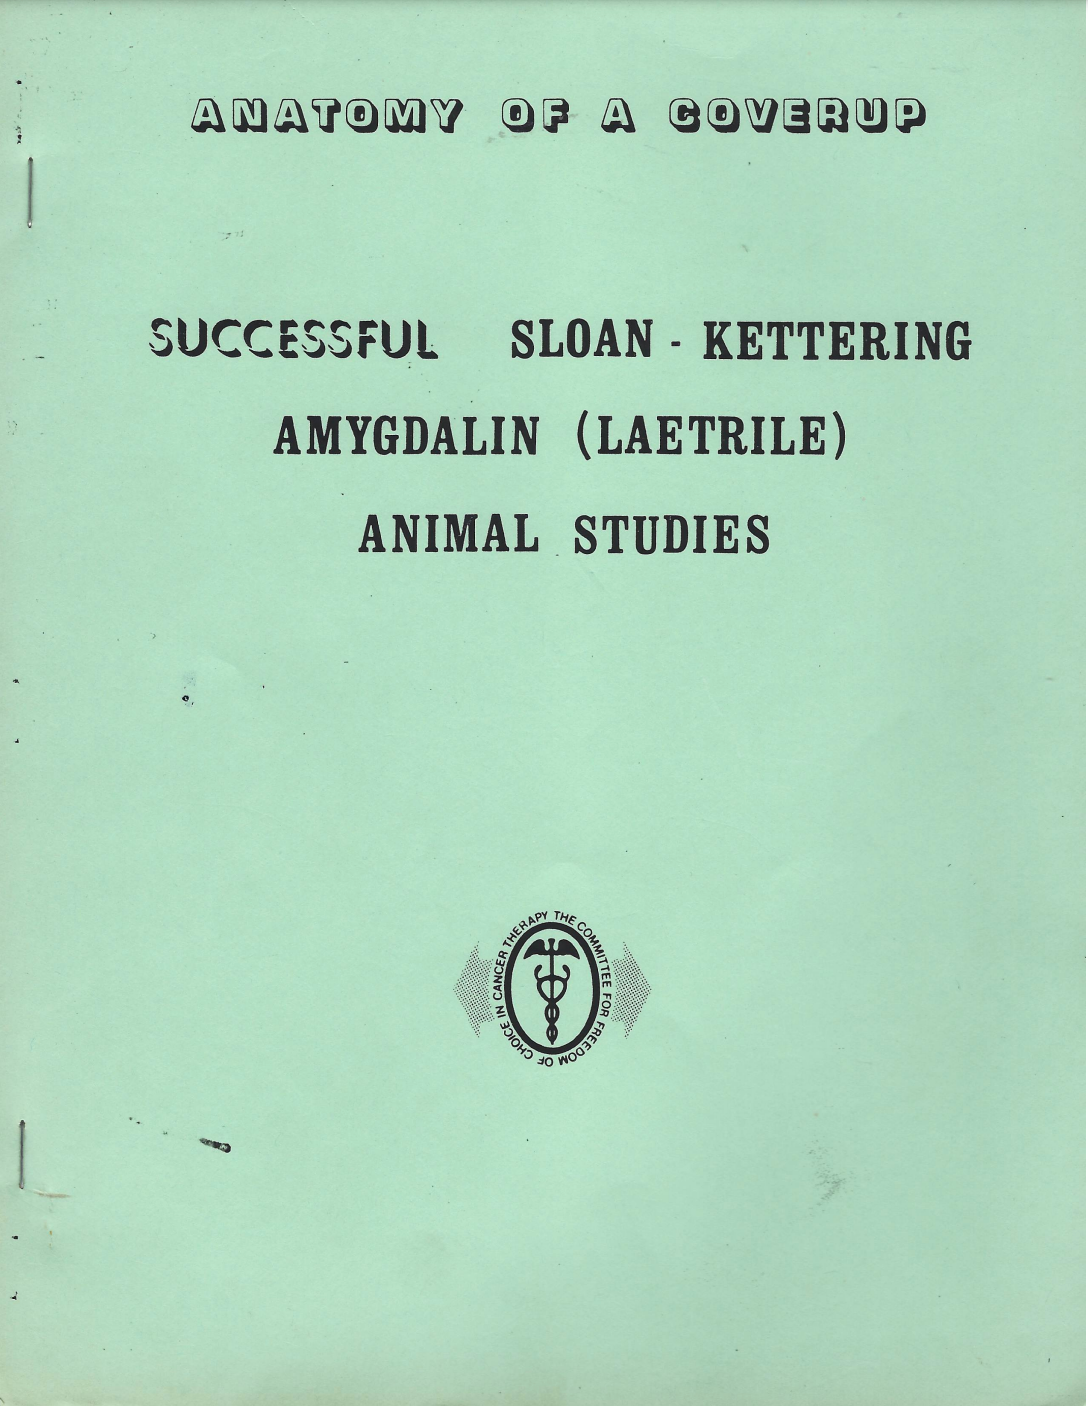 (Book) Anatomy of a Coverup: Successful Sloan-Kettering Amygdalin (Laetrile) Animal Studies